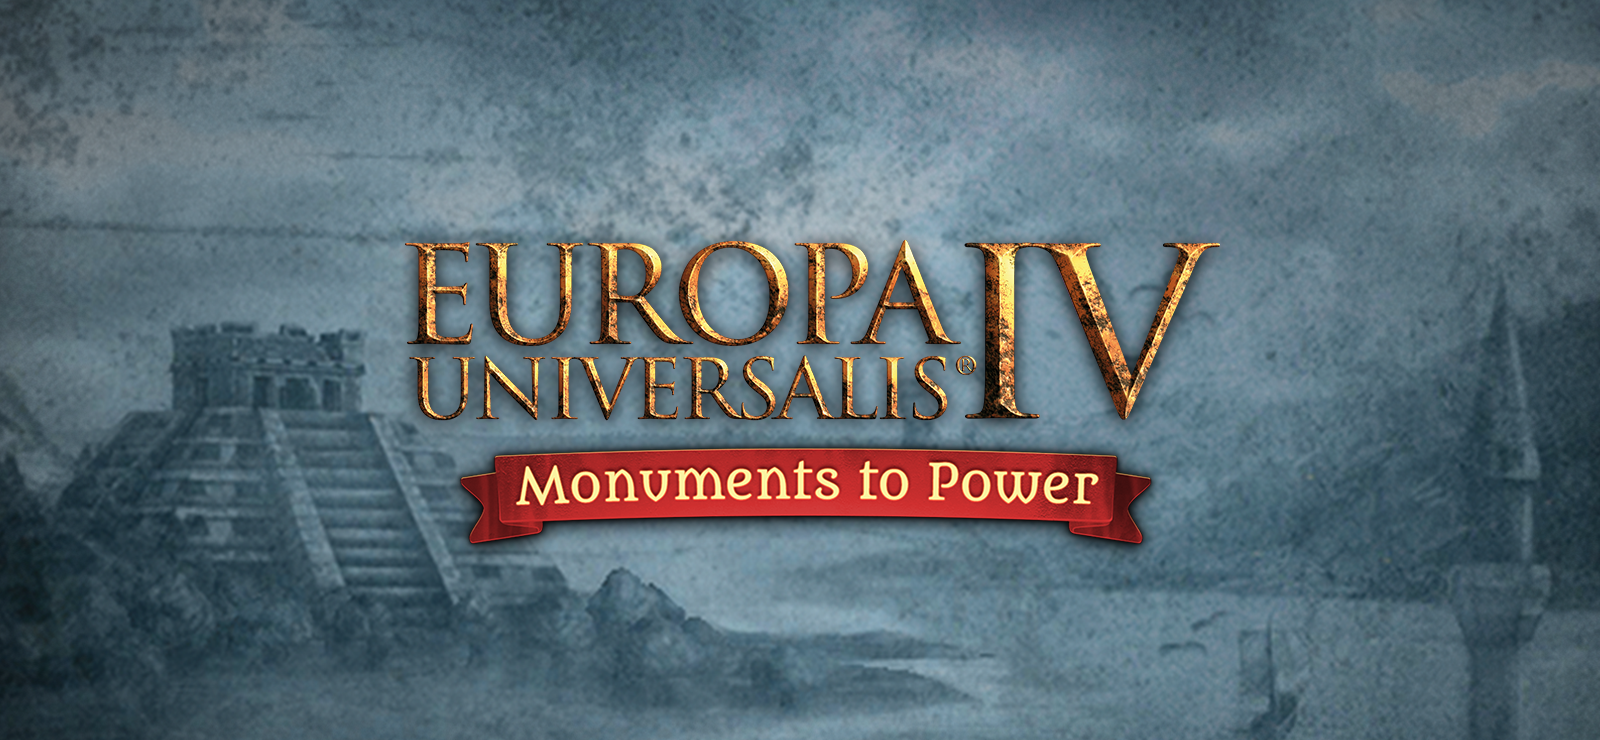 Collection - Europa Universalis IV: Monuments To Power Pack